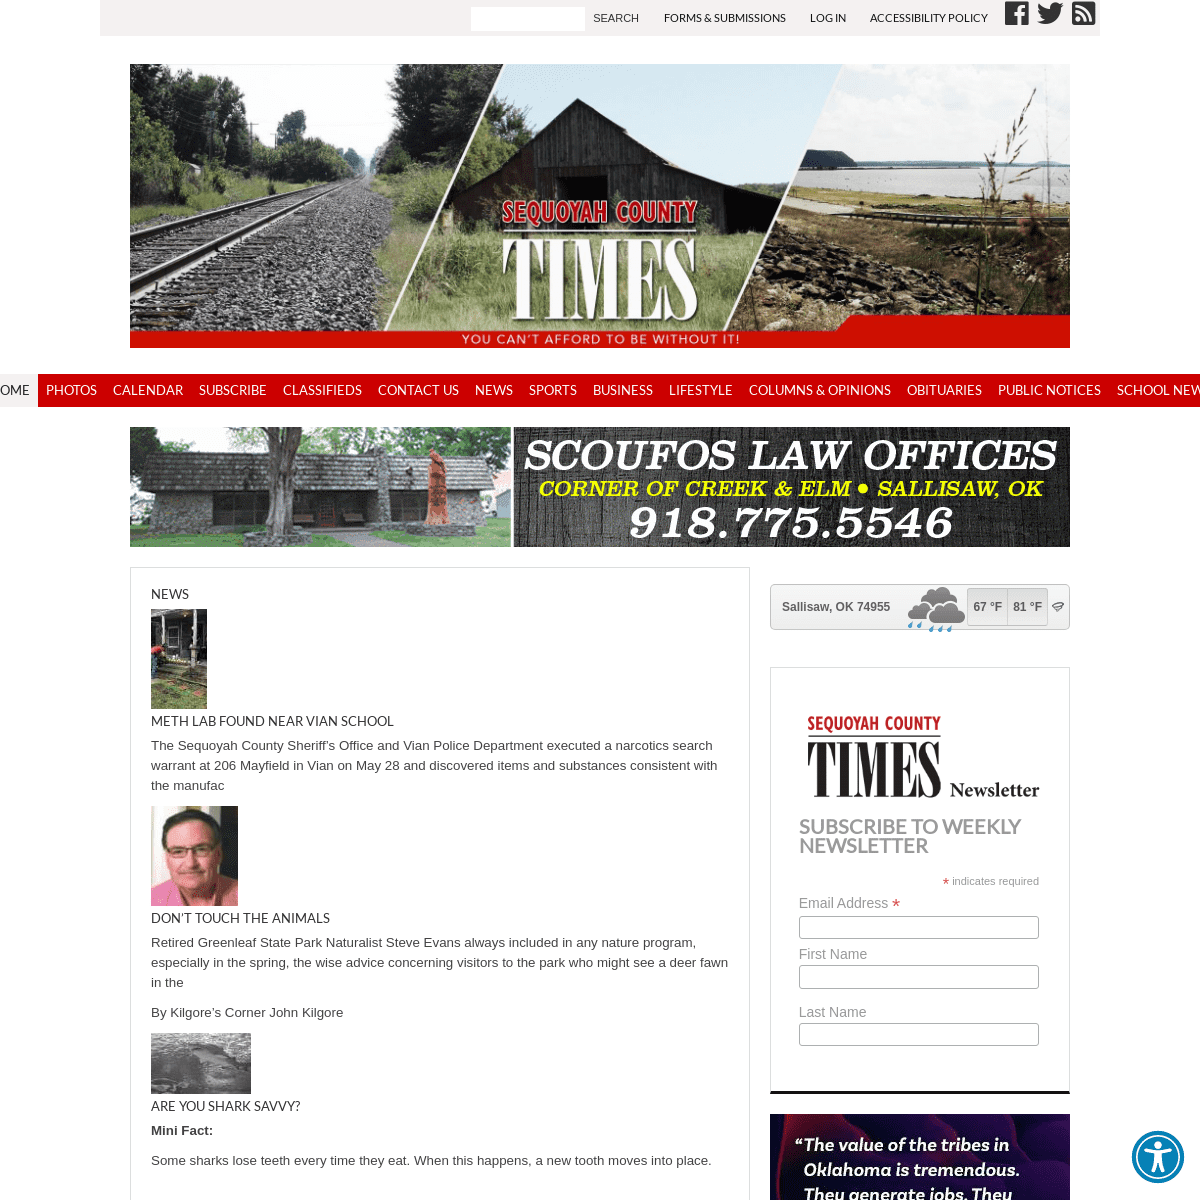 A complete backup of https://sequoyahcountytimes.com